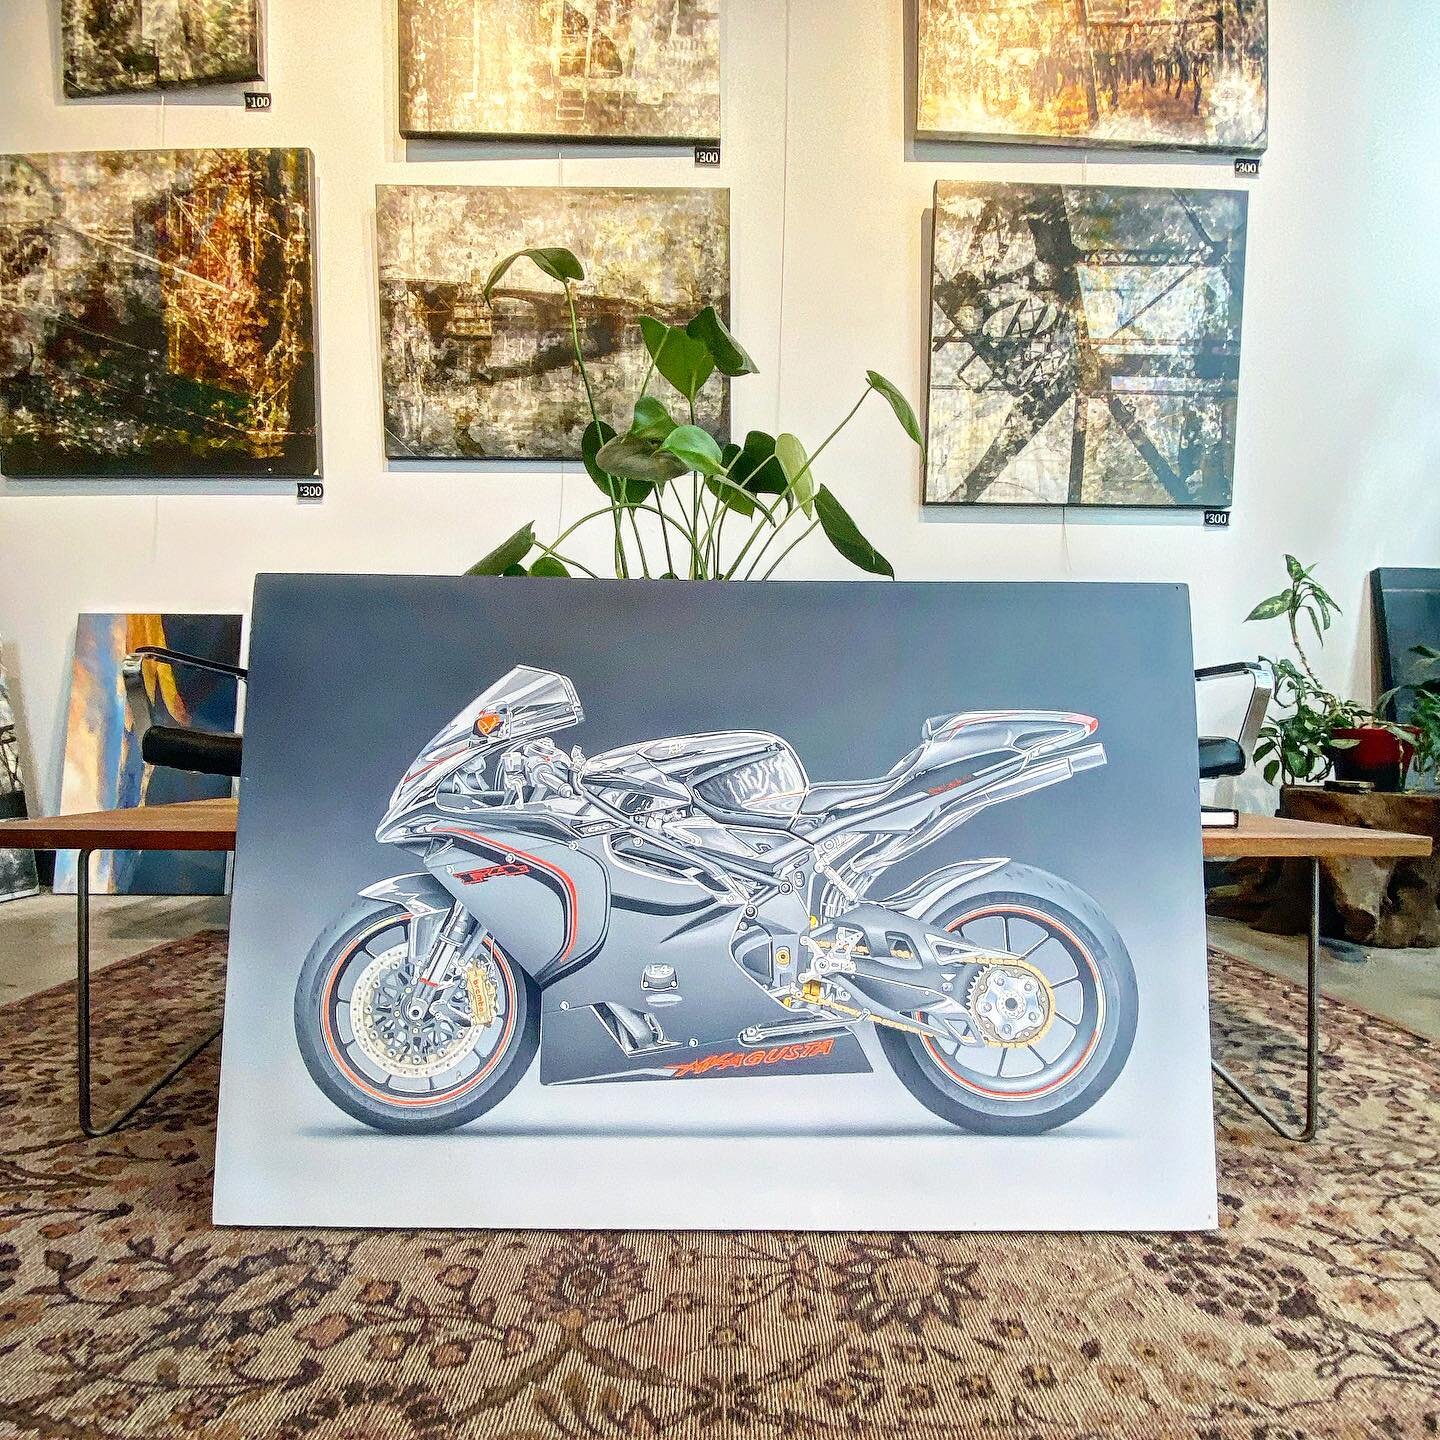 The latest #motorcycle painting by super talented local artist @tedgadeckiart The details in all of his pieces are amazing. #mvagusta #mvagustaf4 #moto #motorcycles #motorcyclelife #motorbiker #bike #superbike #fast #badass #painting #prints #print #